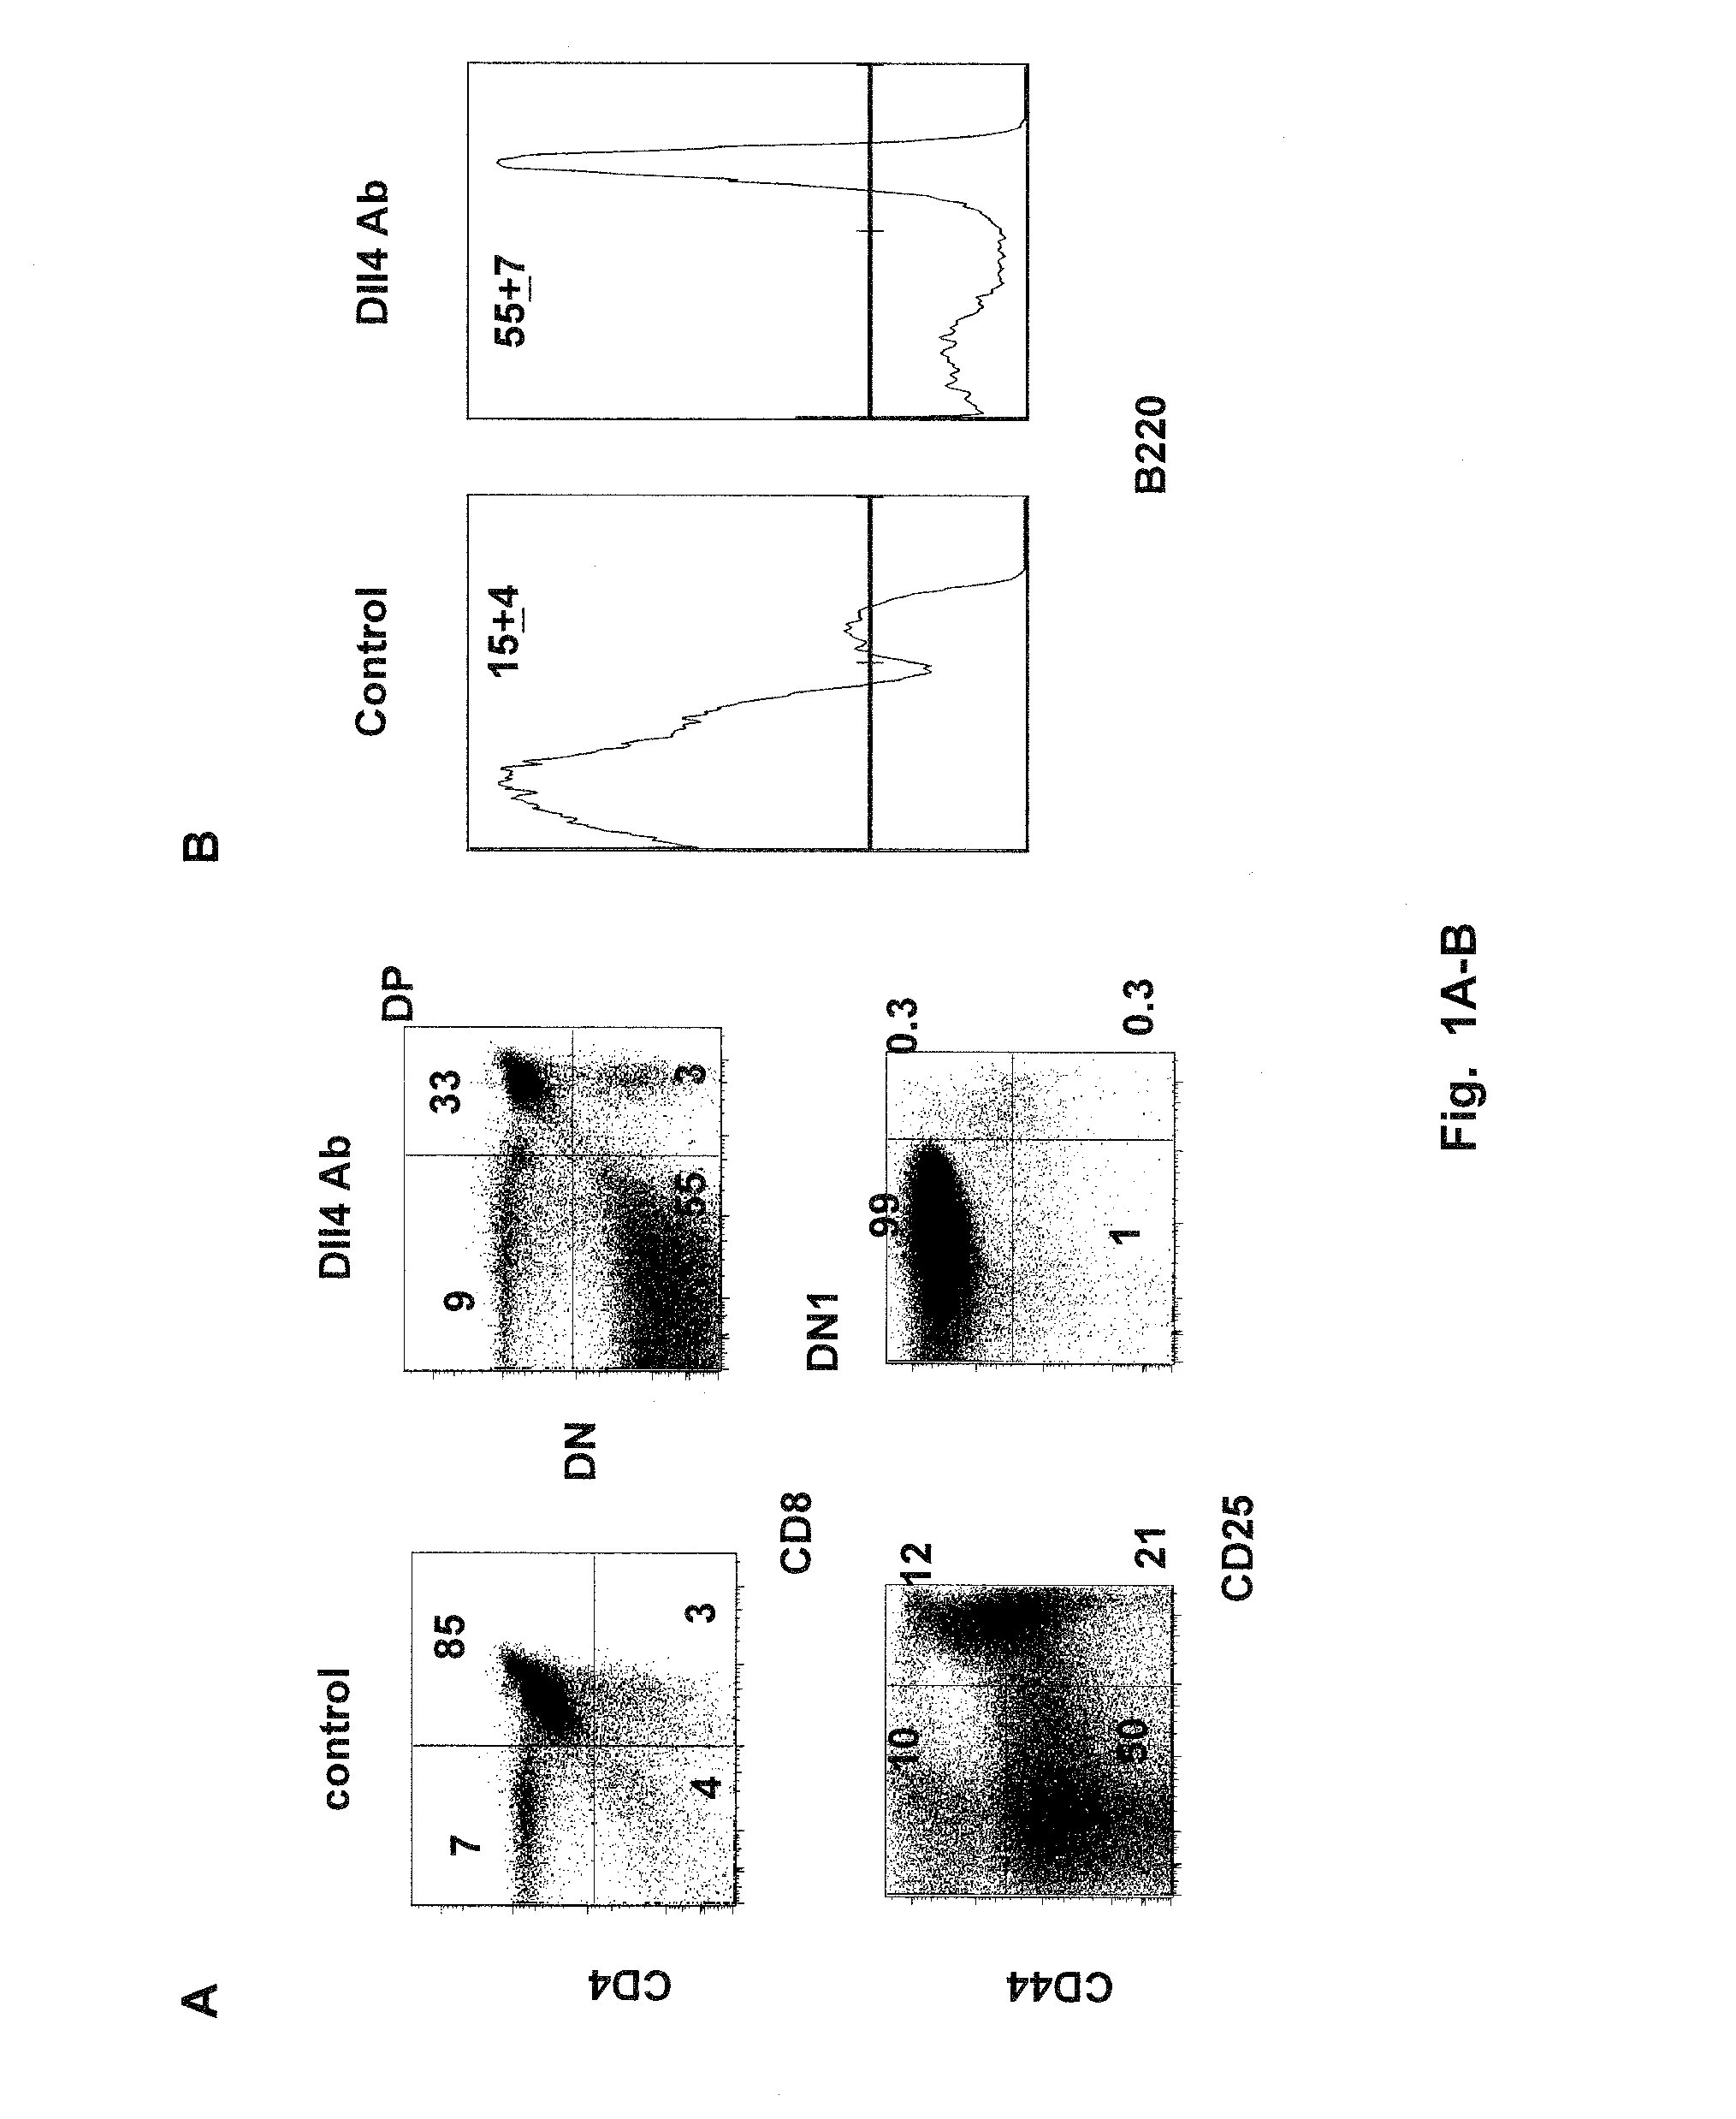 Methods of Treating Autoimmune Diseases with DLL4 Antagonists